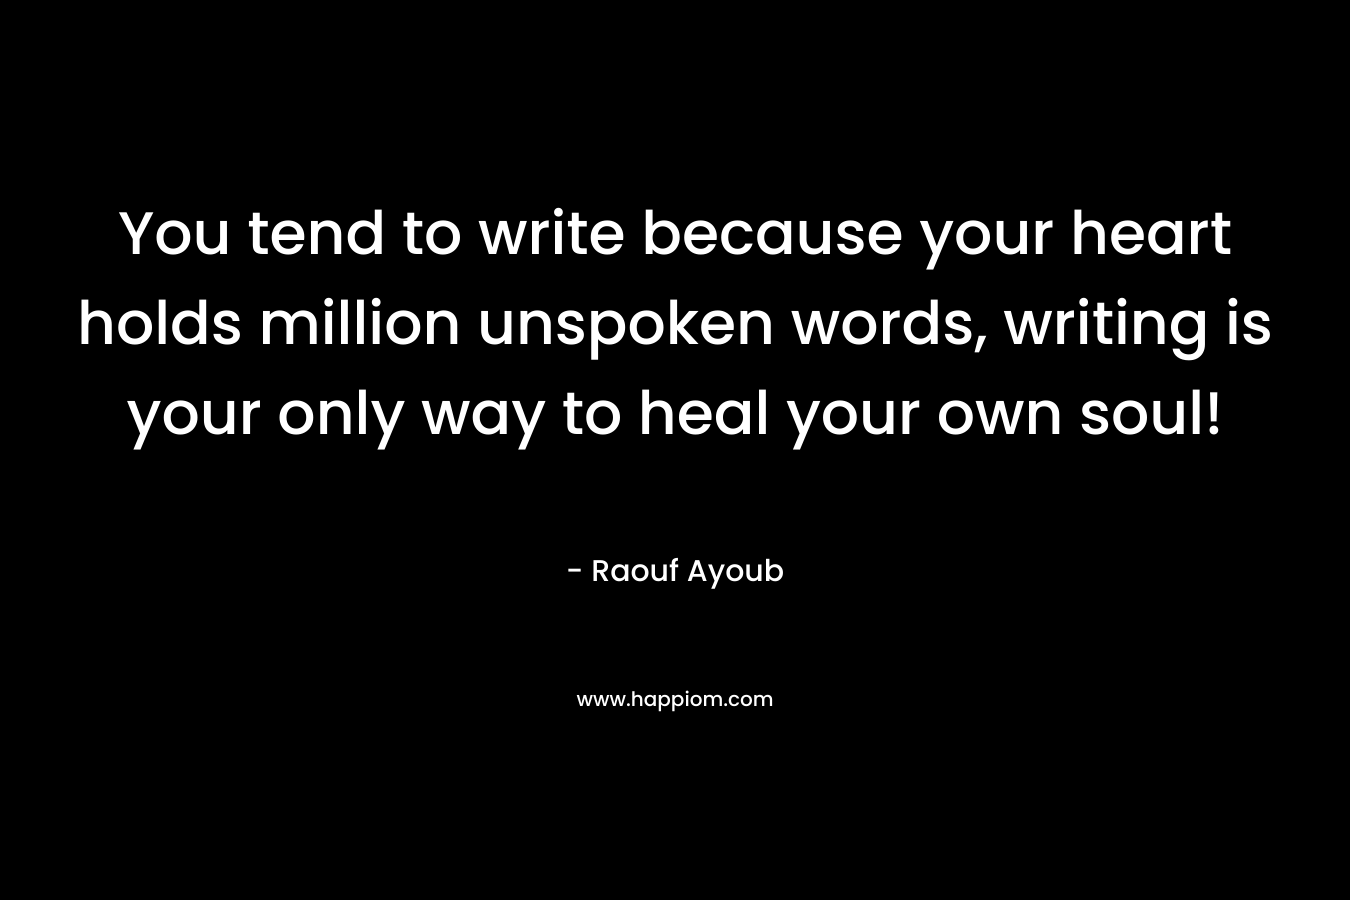 You tend to write because your heart holds million unspoken words, writing is your only way to heal your own soul!